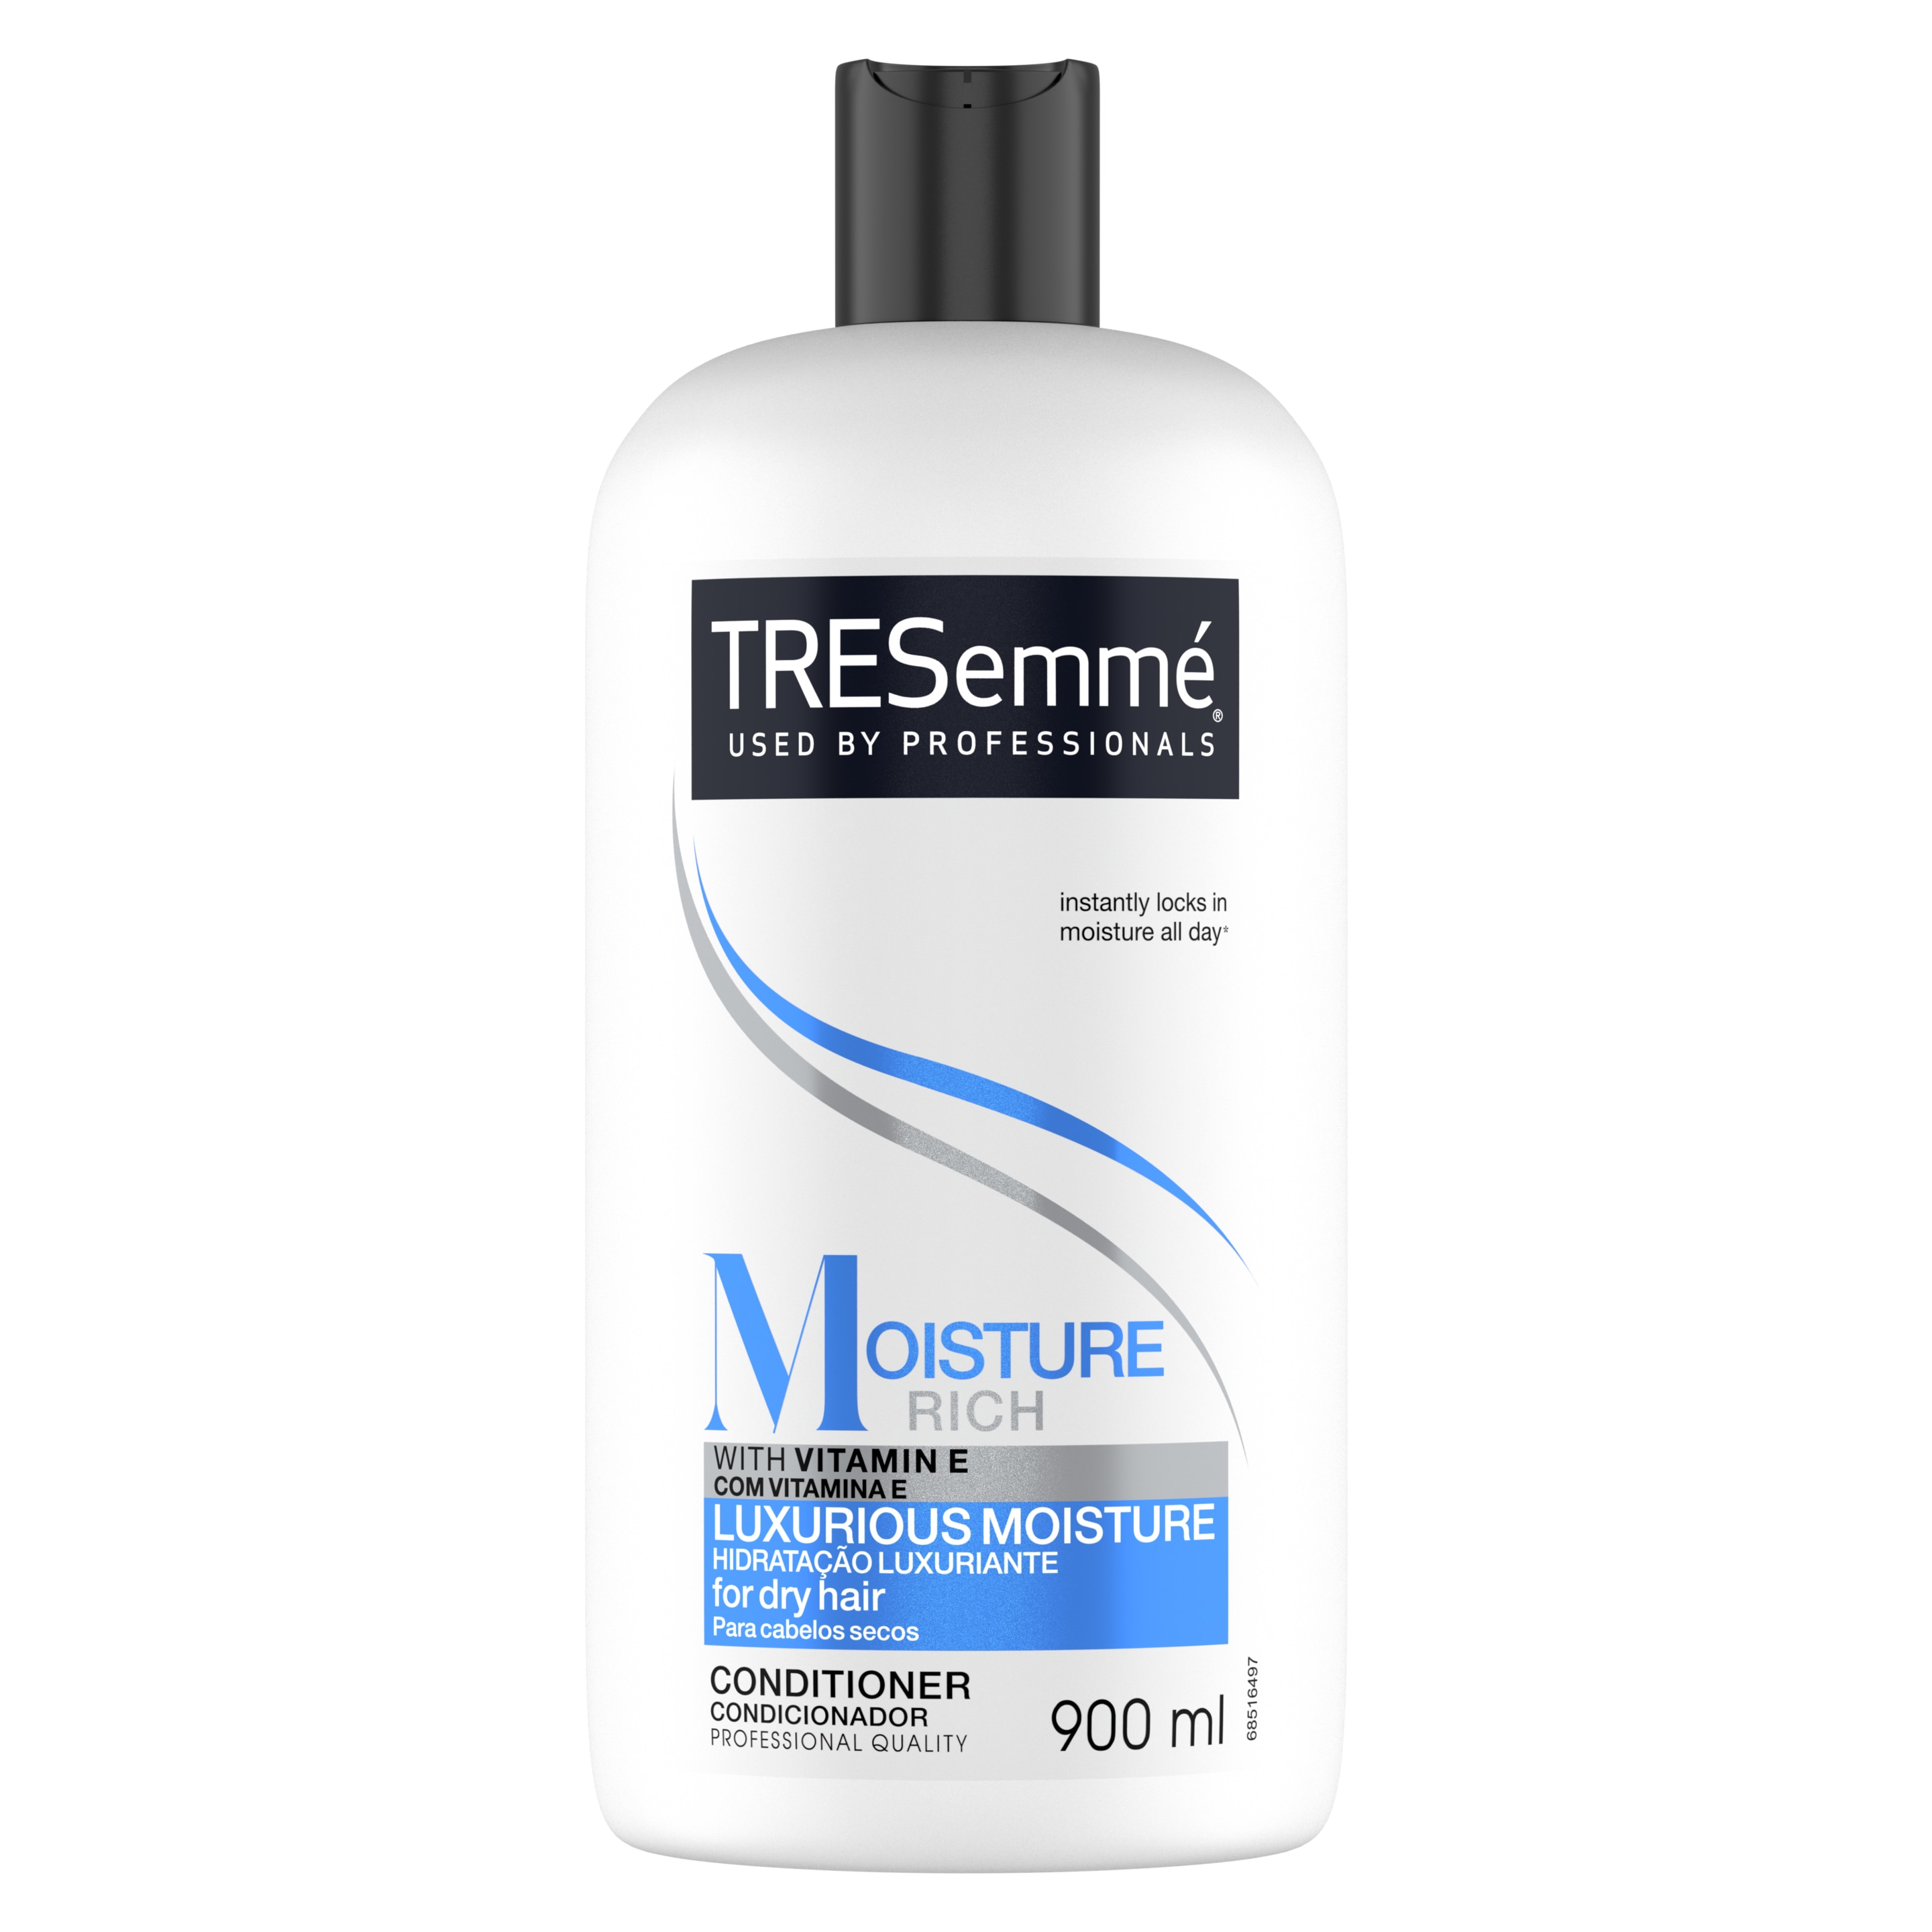 TRESemmé Moisture Rich Conditioner 900ml Front of pack image